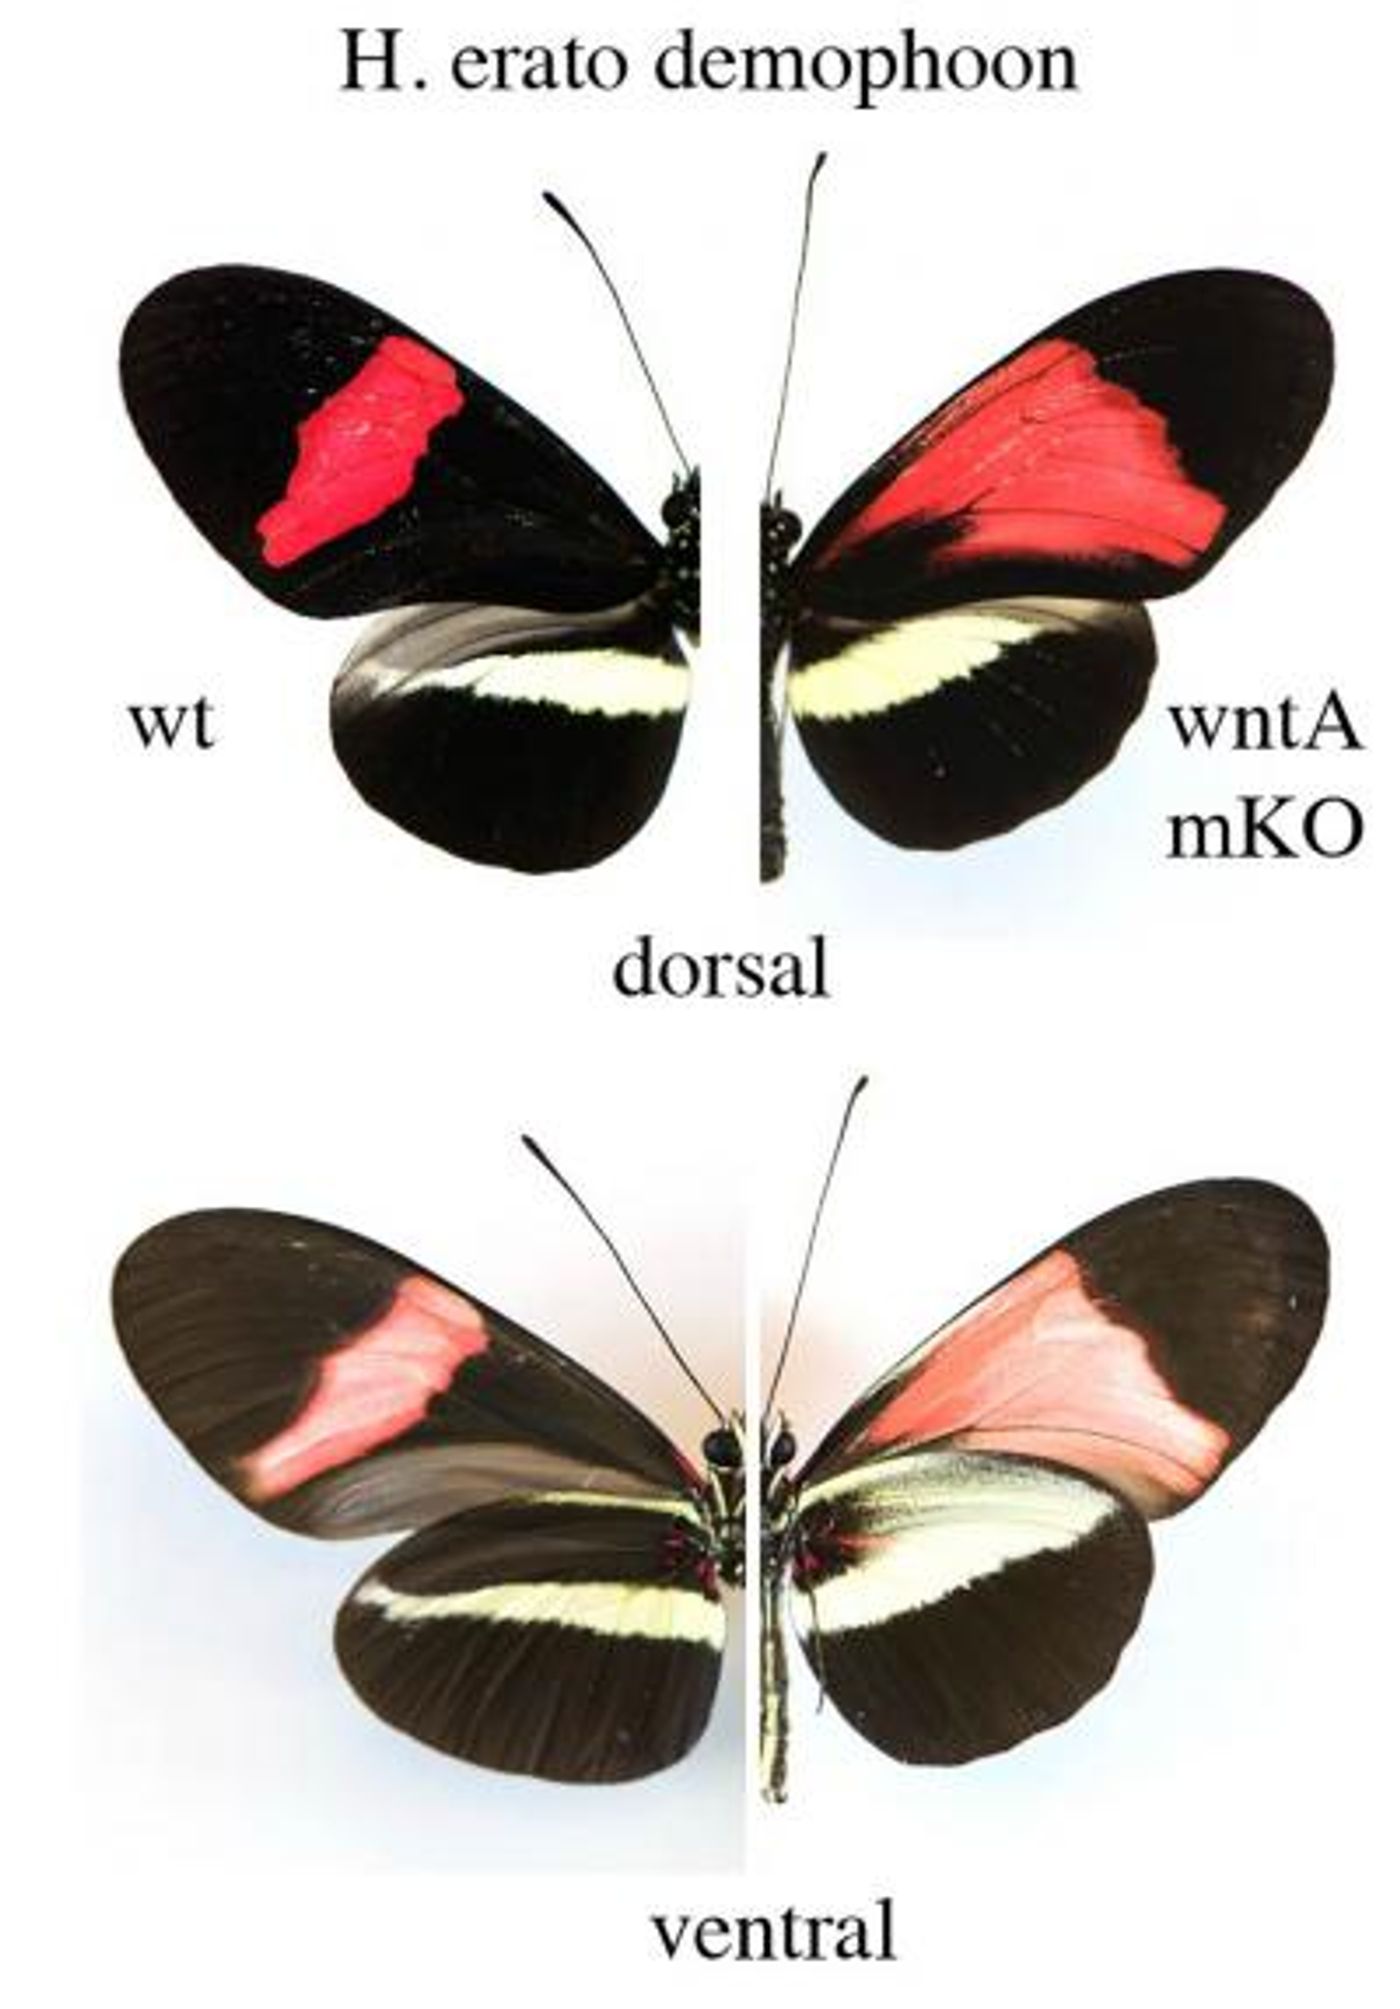 On the left, the normal or wild type (left) wing pattern of the passionfruit butterfly Heliconius eratus demophoon, on the right, the same butterfly after the WntA gene has been knocked out. / Credit: Smithsonian Tropical Research Institute